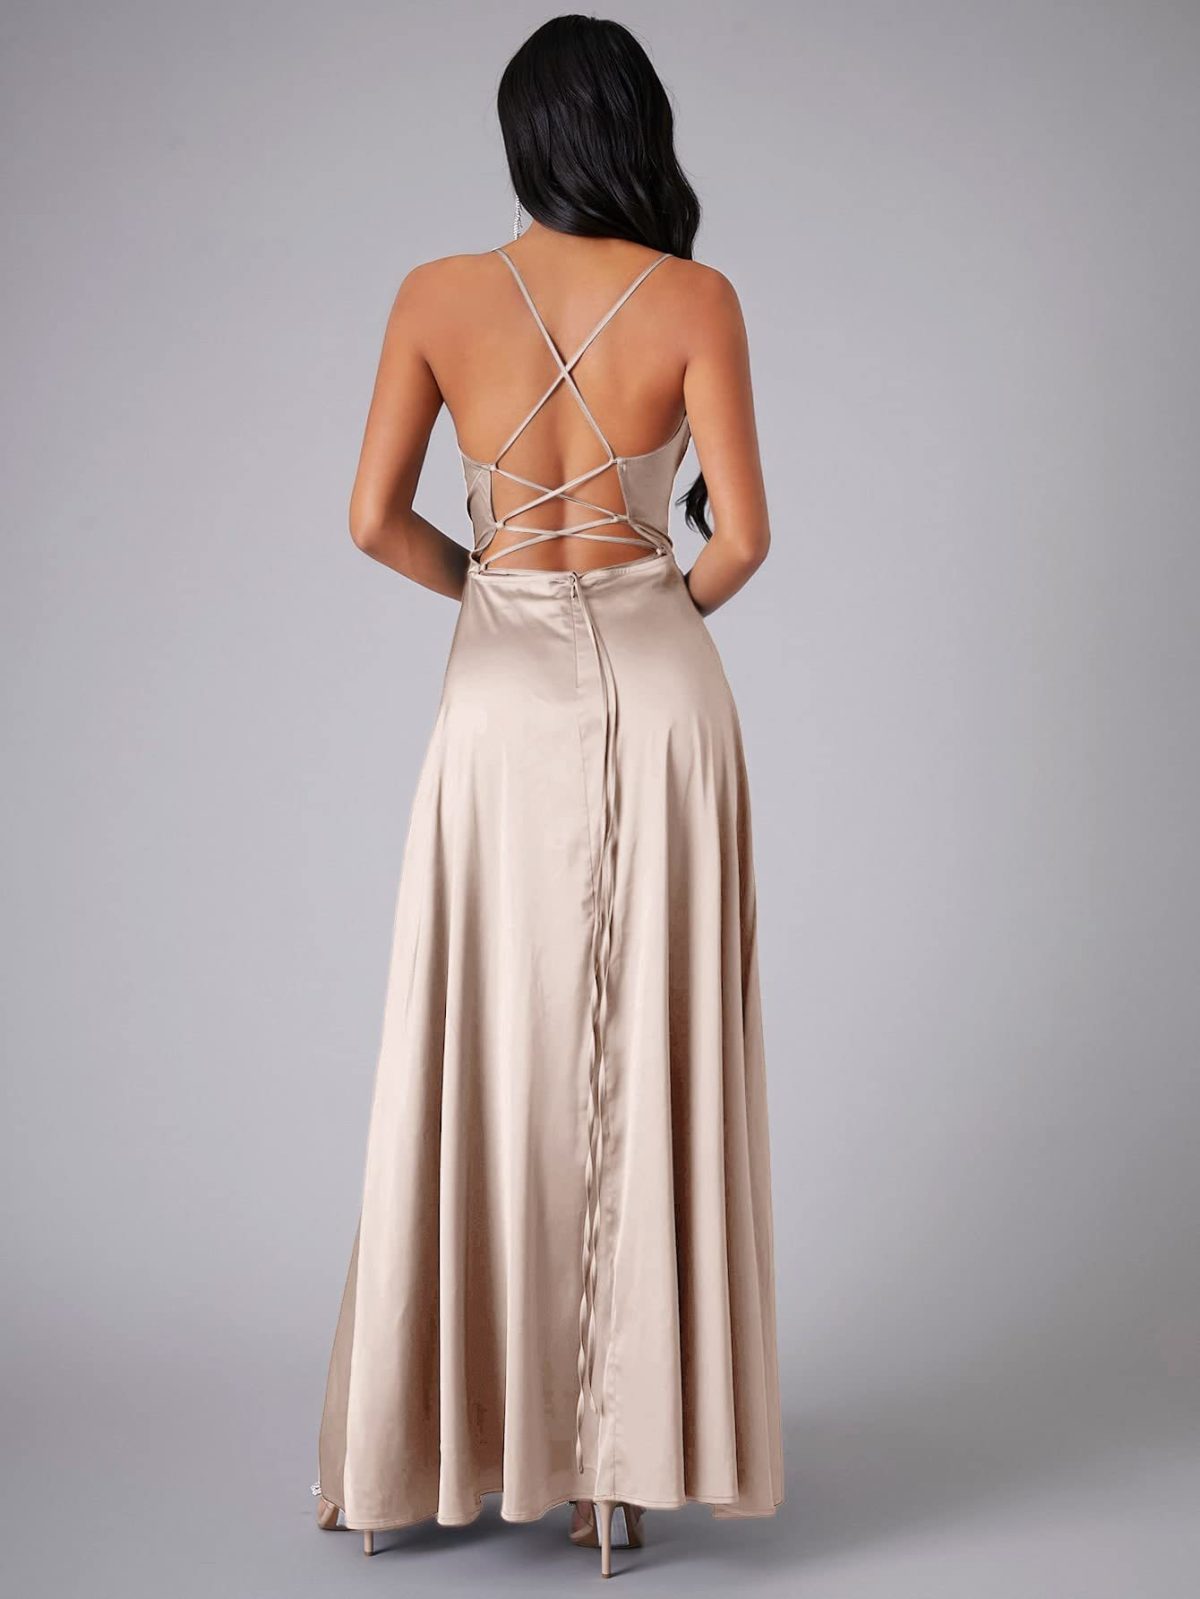 Sexy Slimming Slim Fit Backless Dress in Dresses